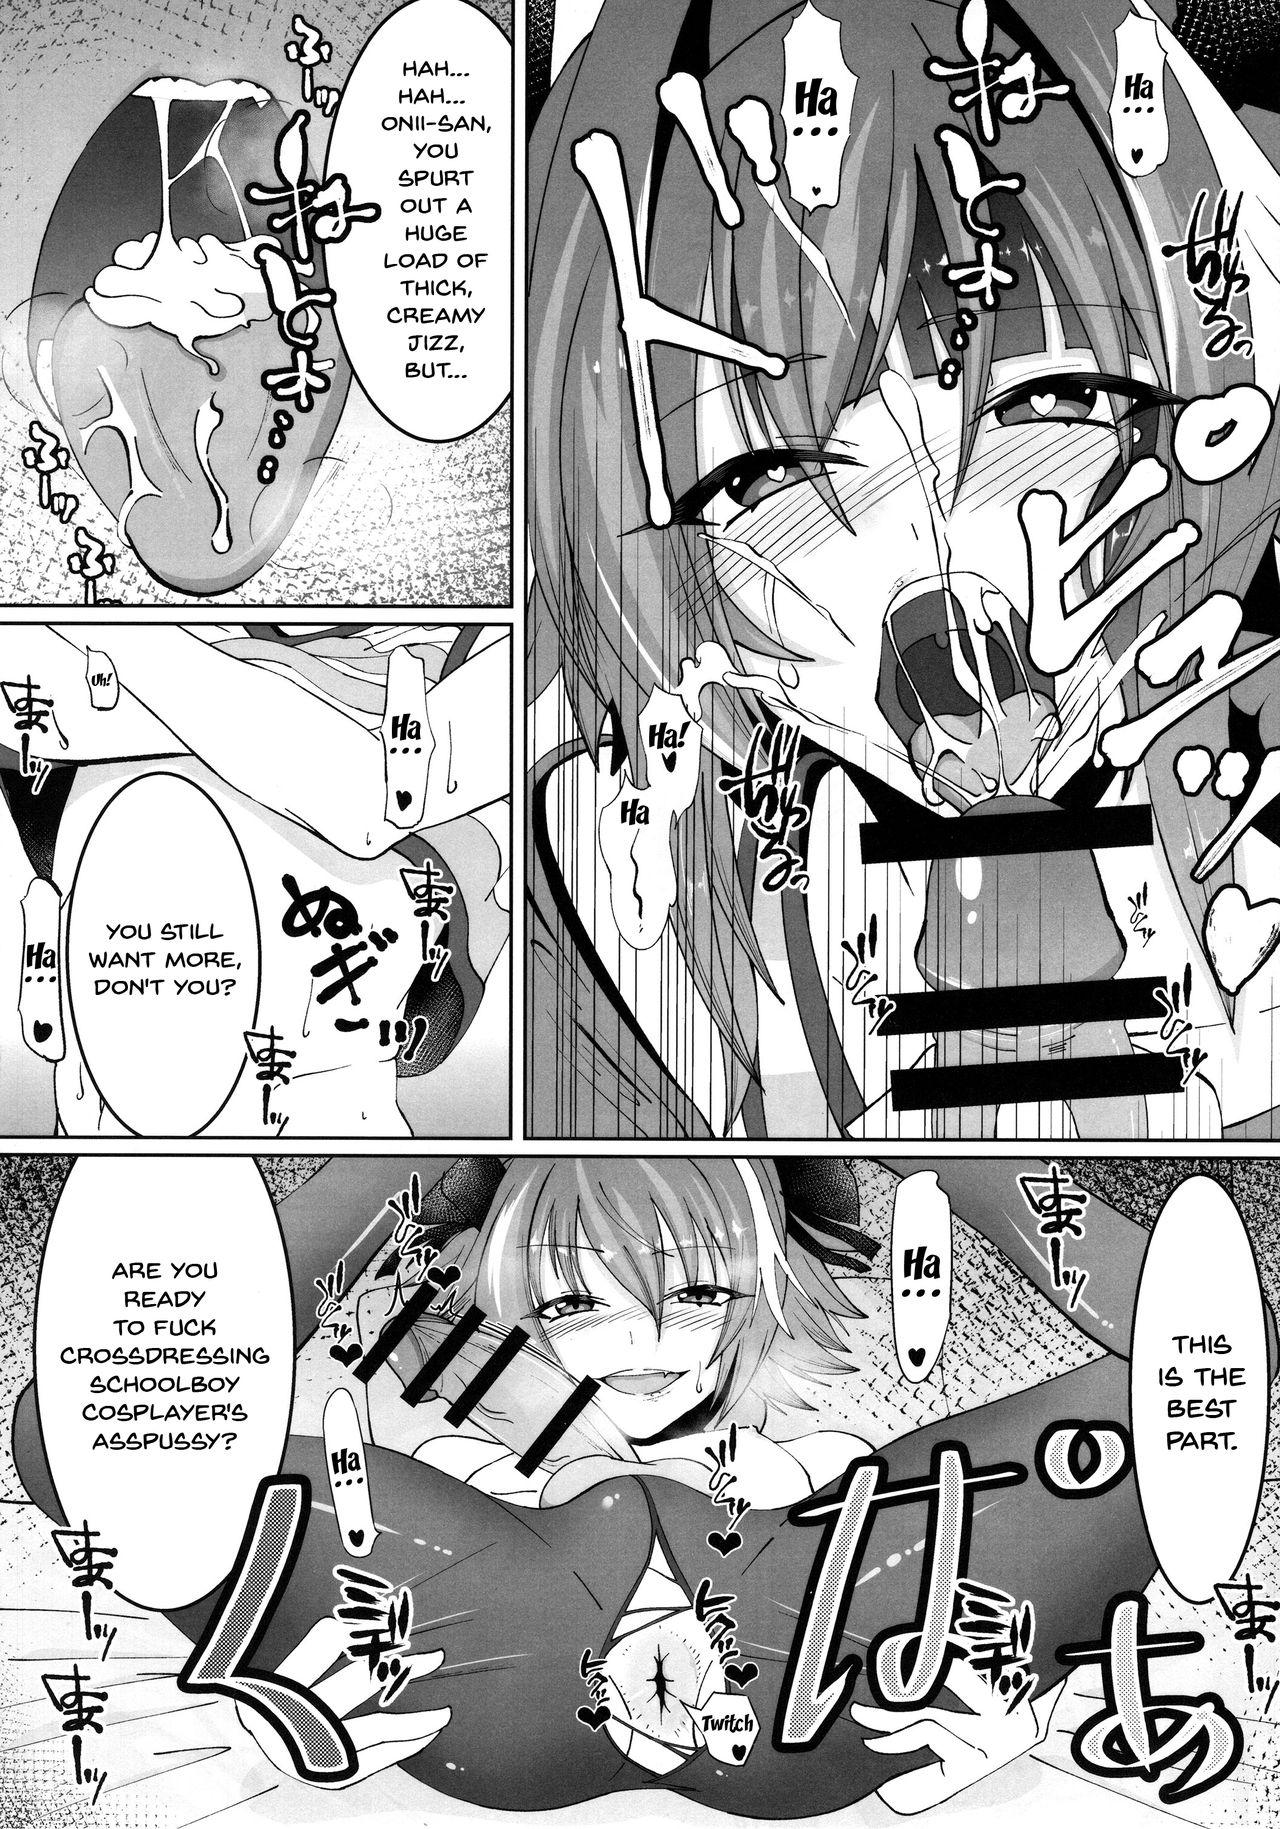 Foda Deal With The Devil - Fate grand order Nalgas - Page 9